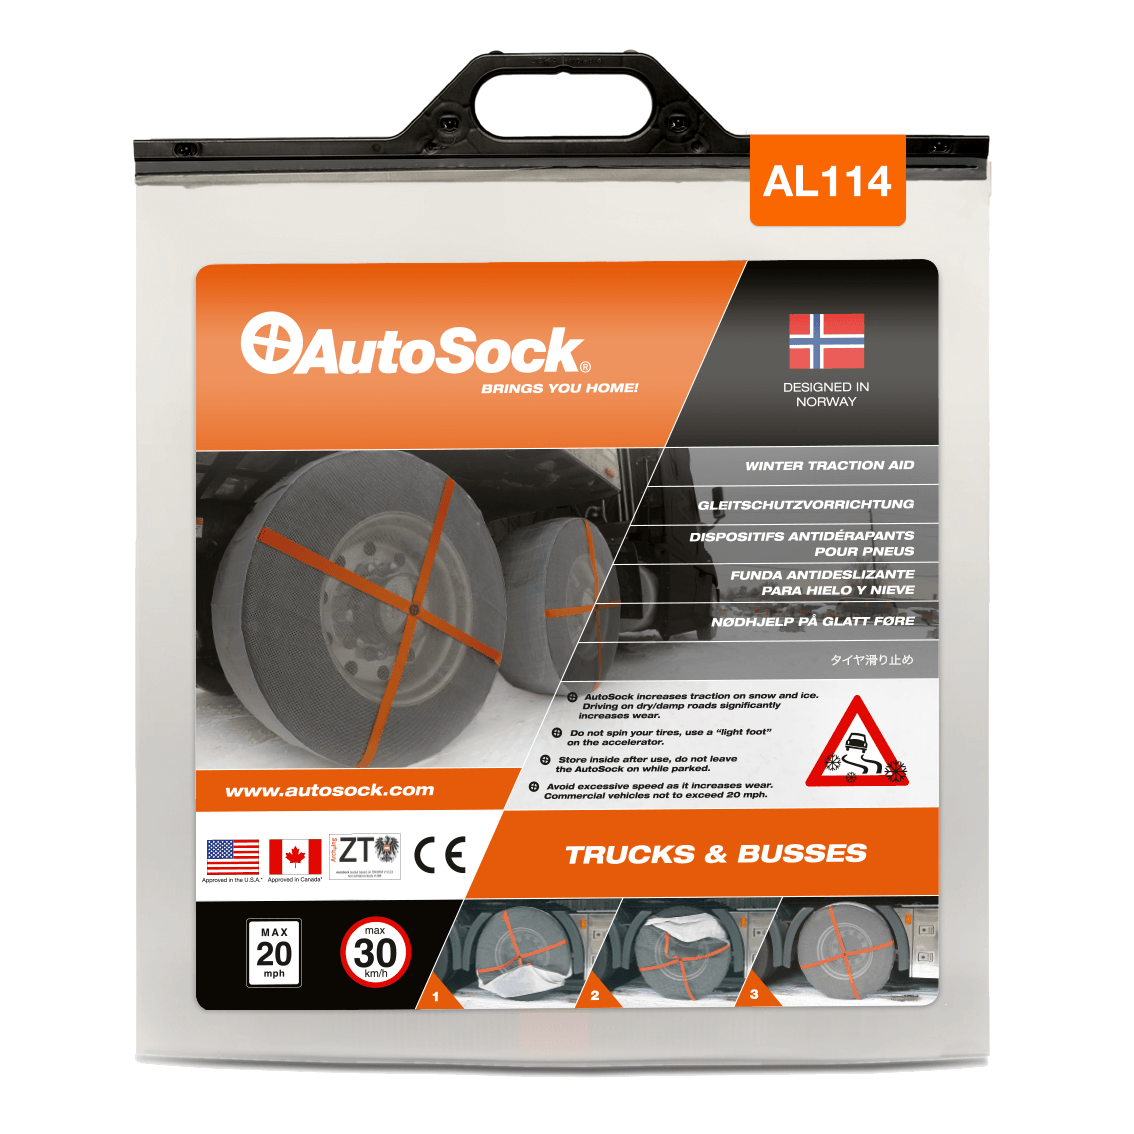 Product Packaging of AutoSock AL 114 AL114 for trucks (front view)